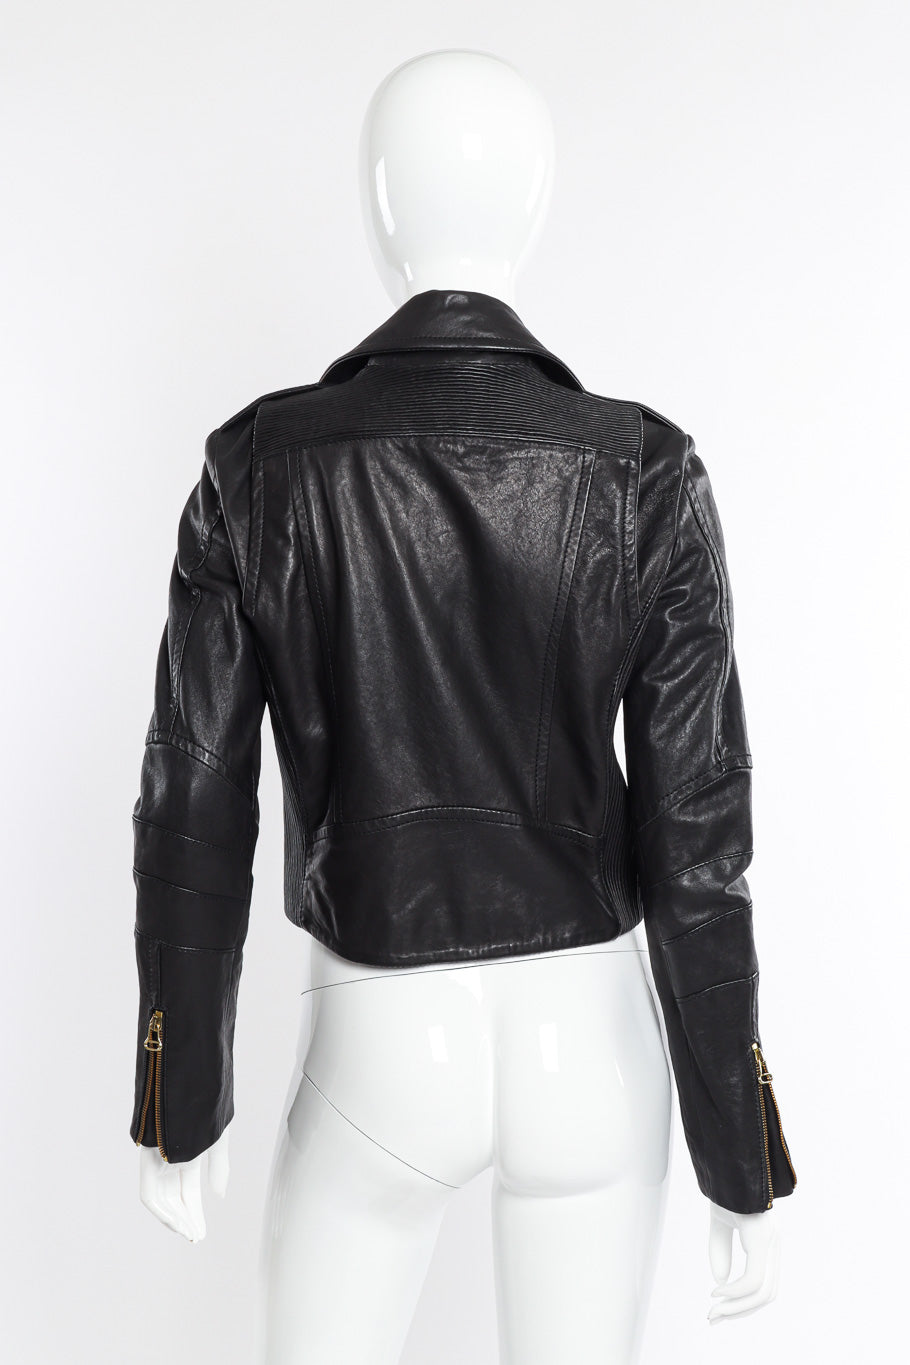 Pierre Balmain Ribbed Leather Moto Jacket back view on mannequin @Recessla